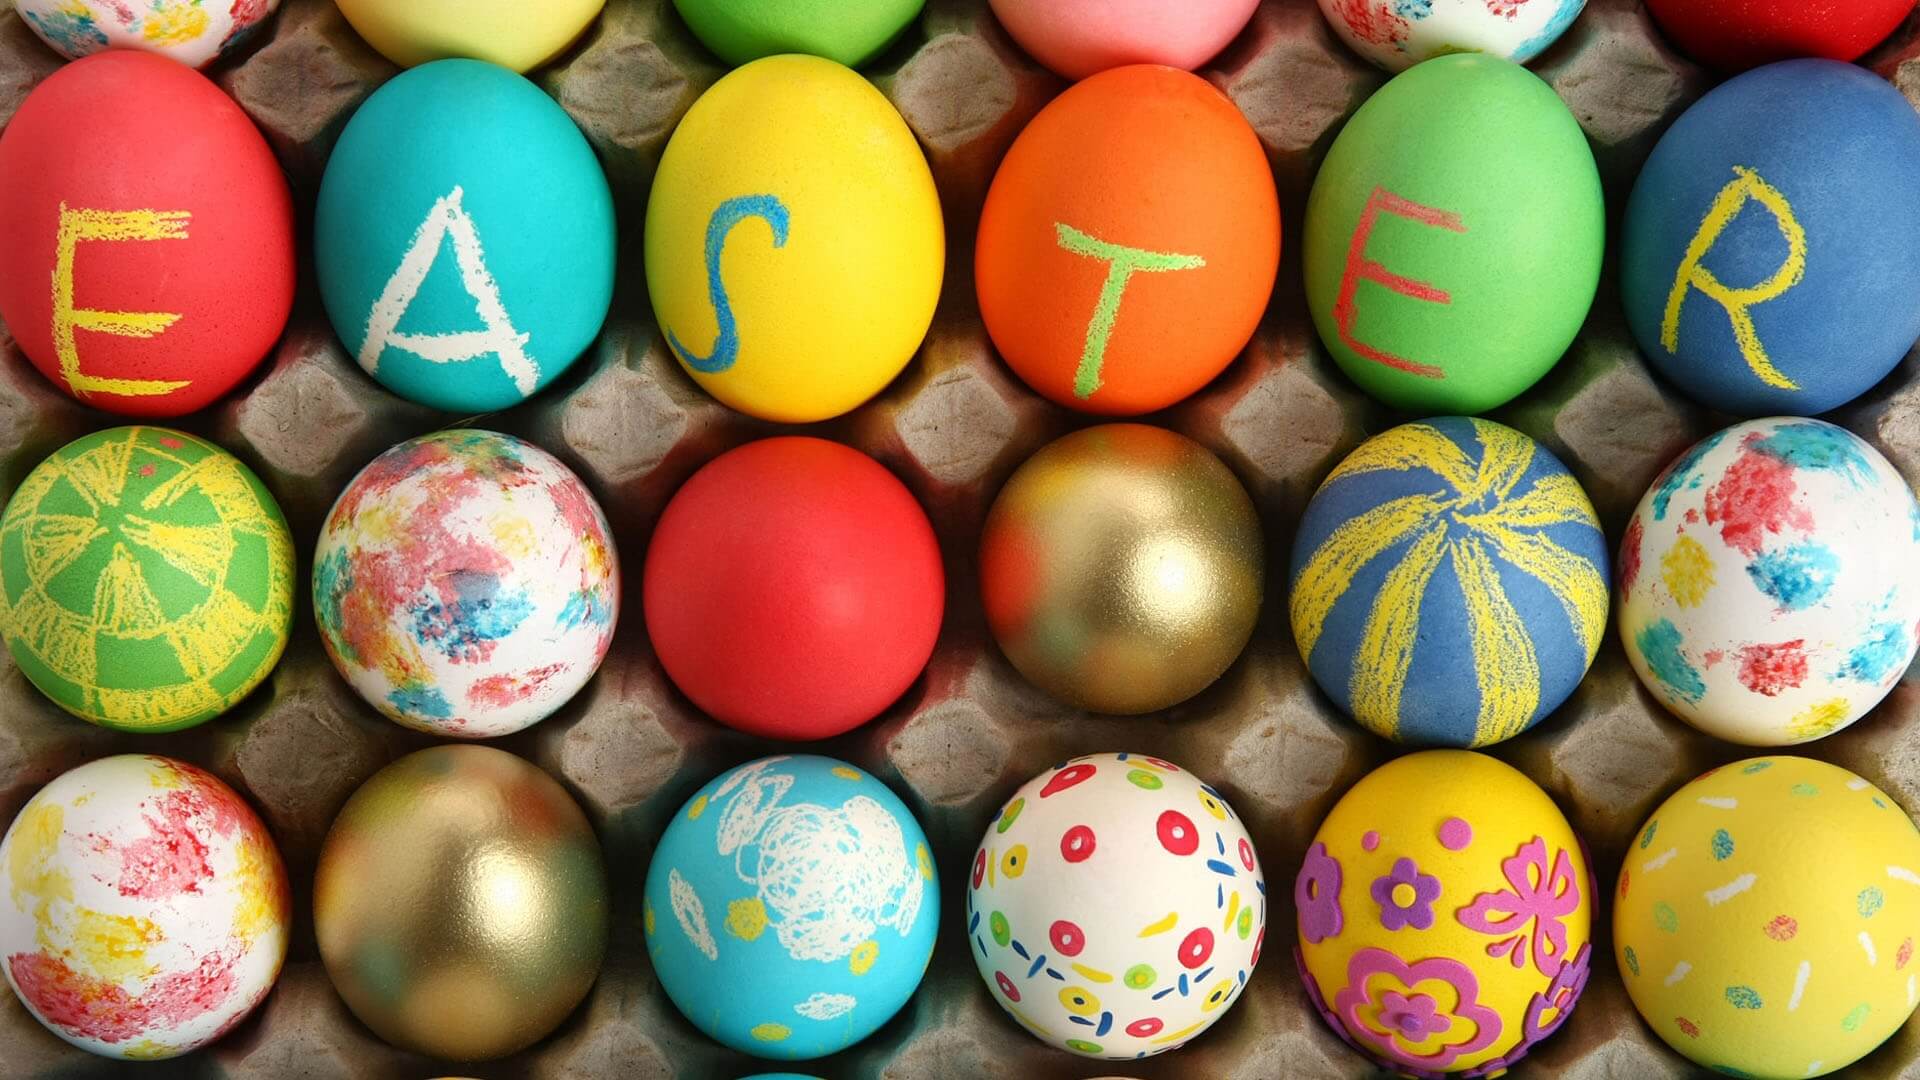 Some colourful eggs showing the message, Easter.